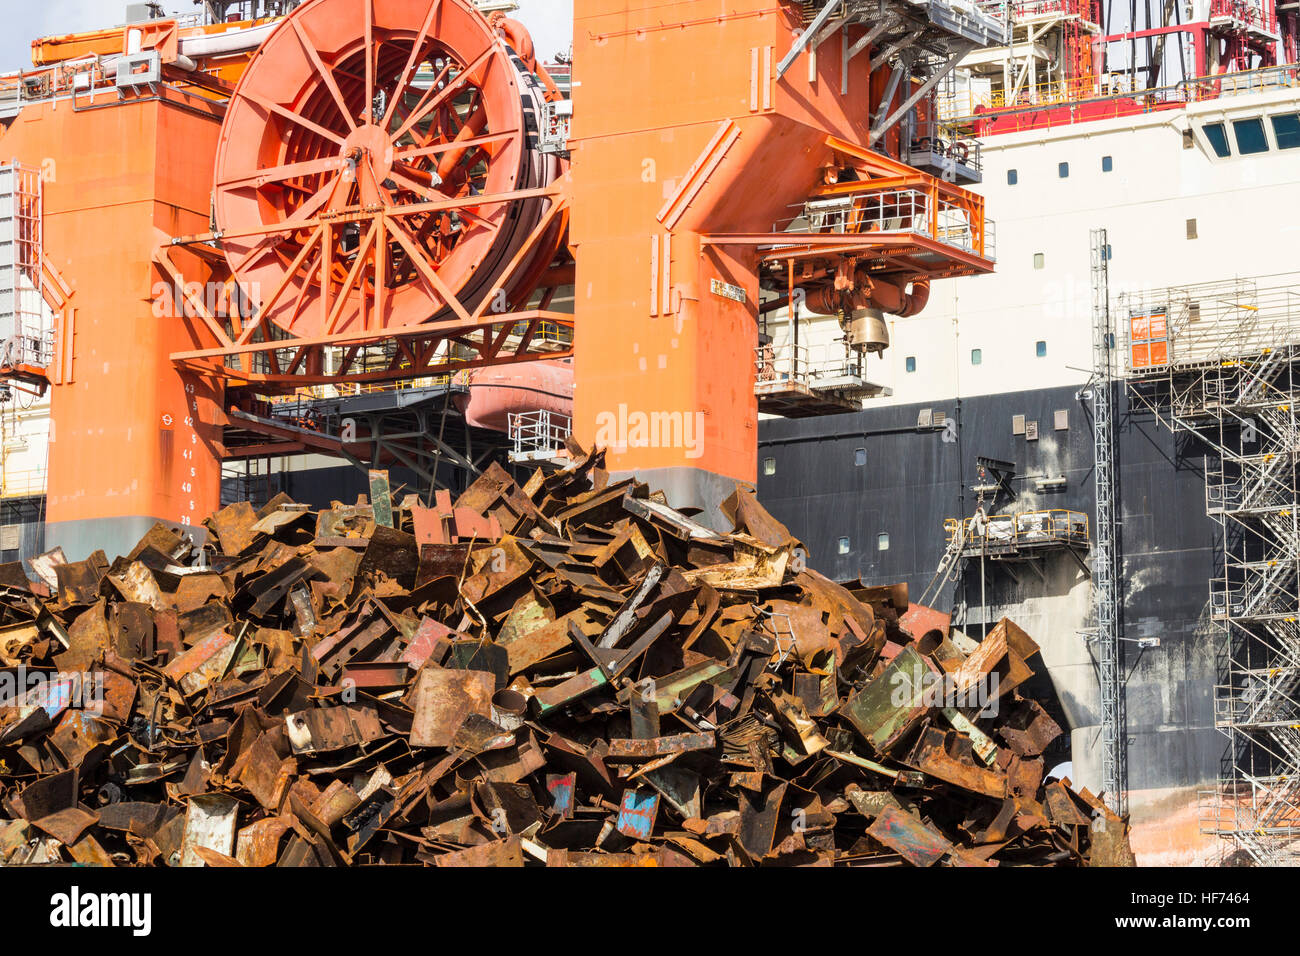 Scrap metal from ship broken up for recycling in port scrapyard in Spain. Stock Photo